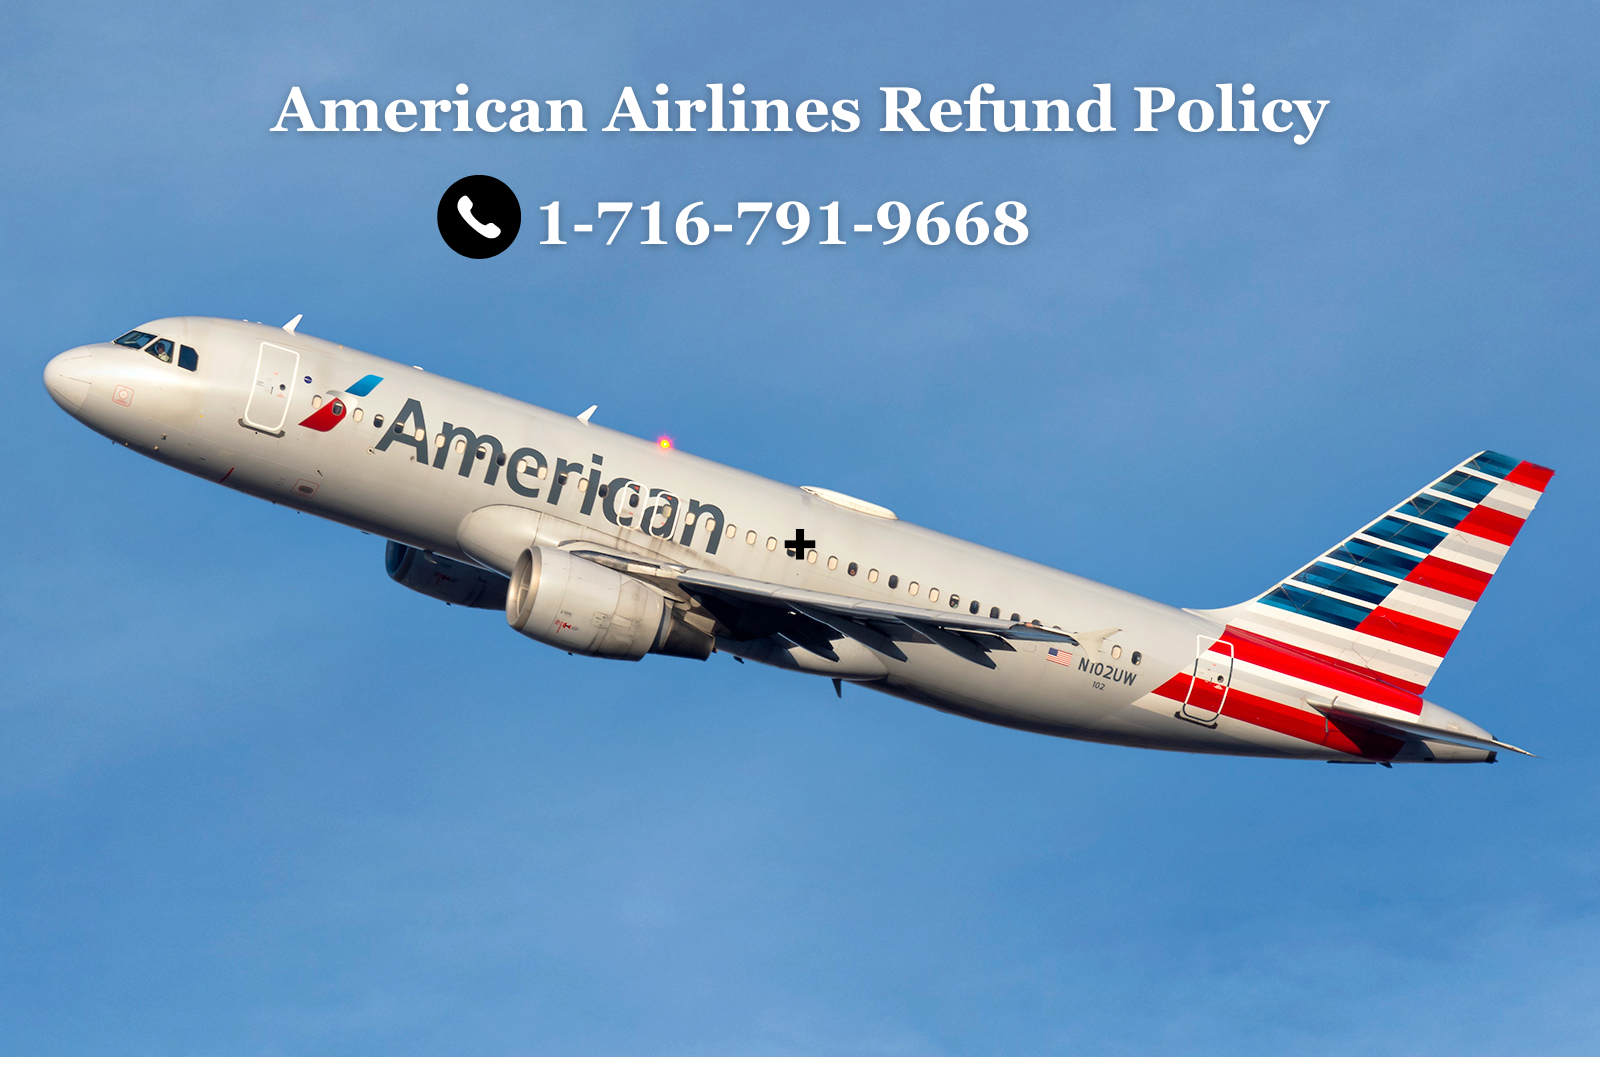 American Airlines Refund Policy $(1–716–791–(9668)*